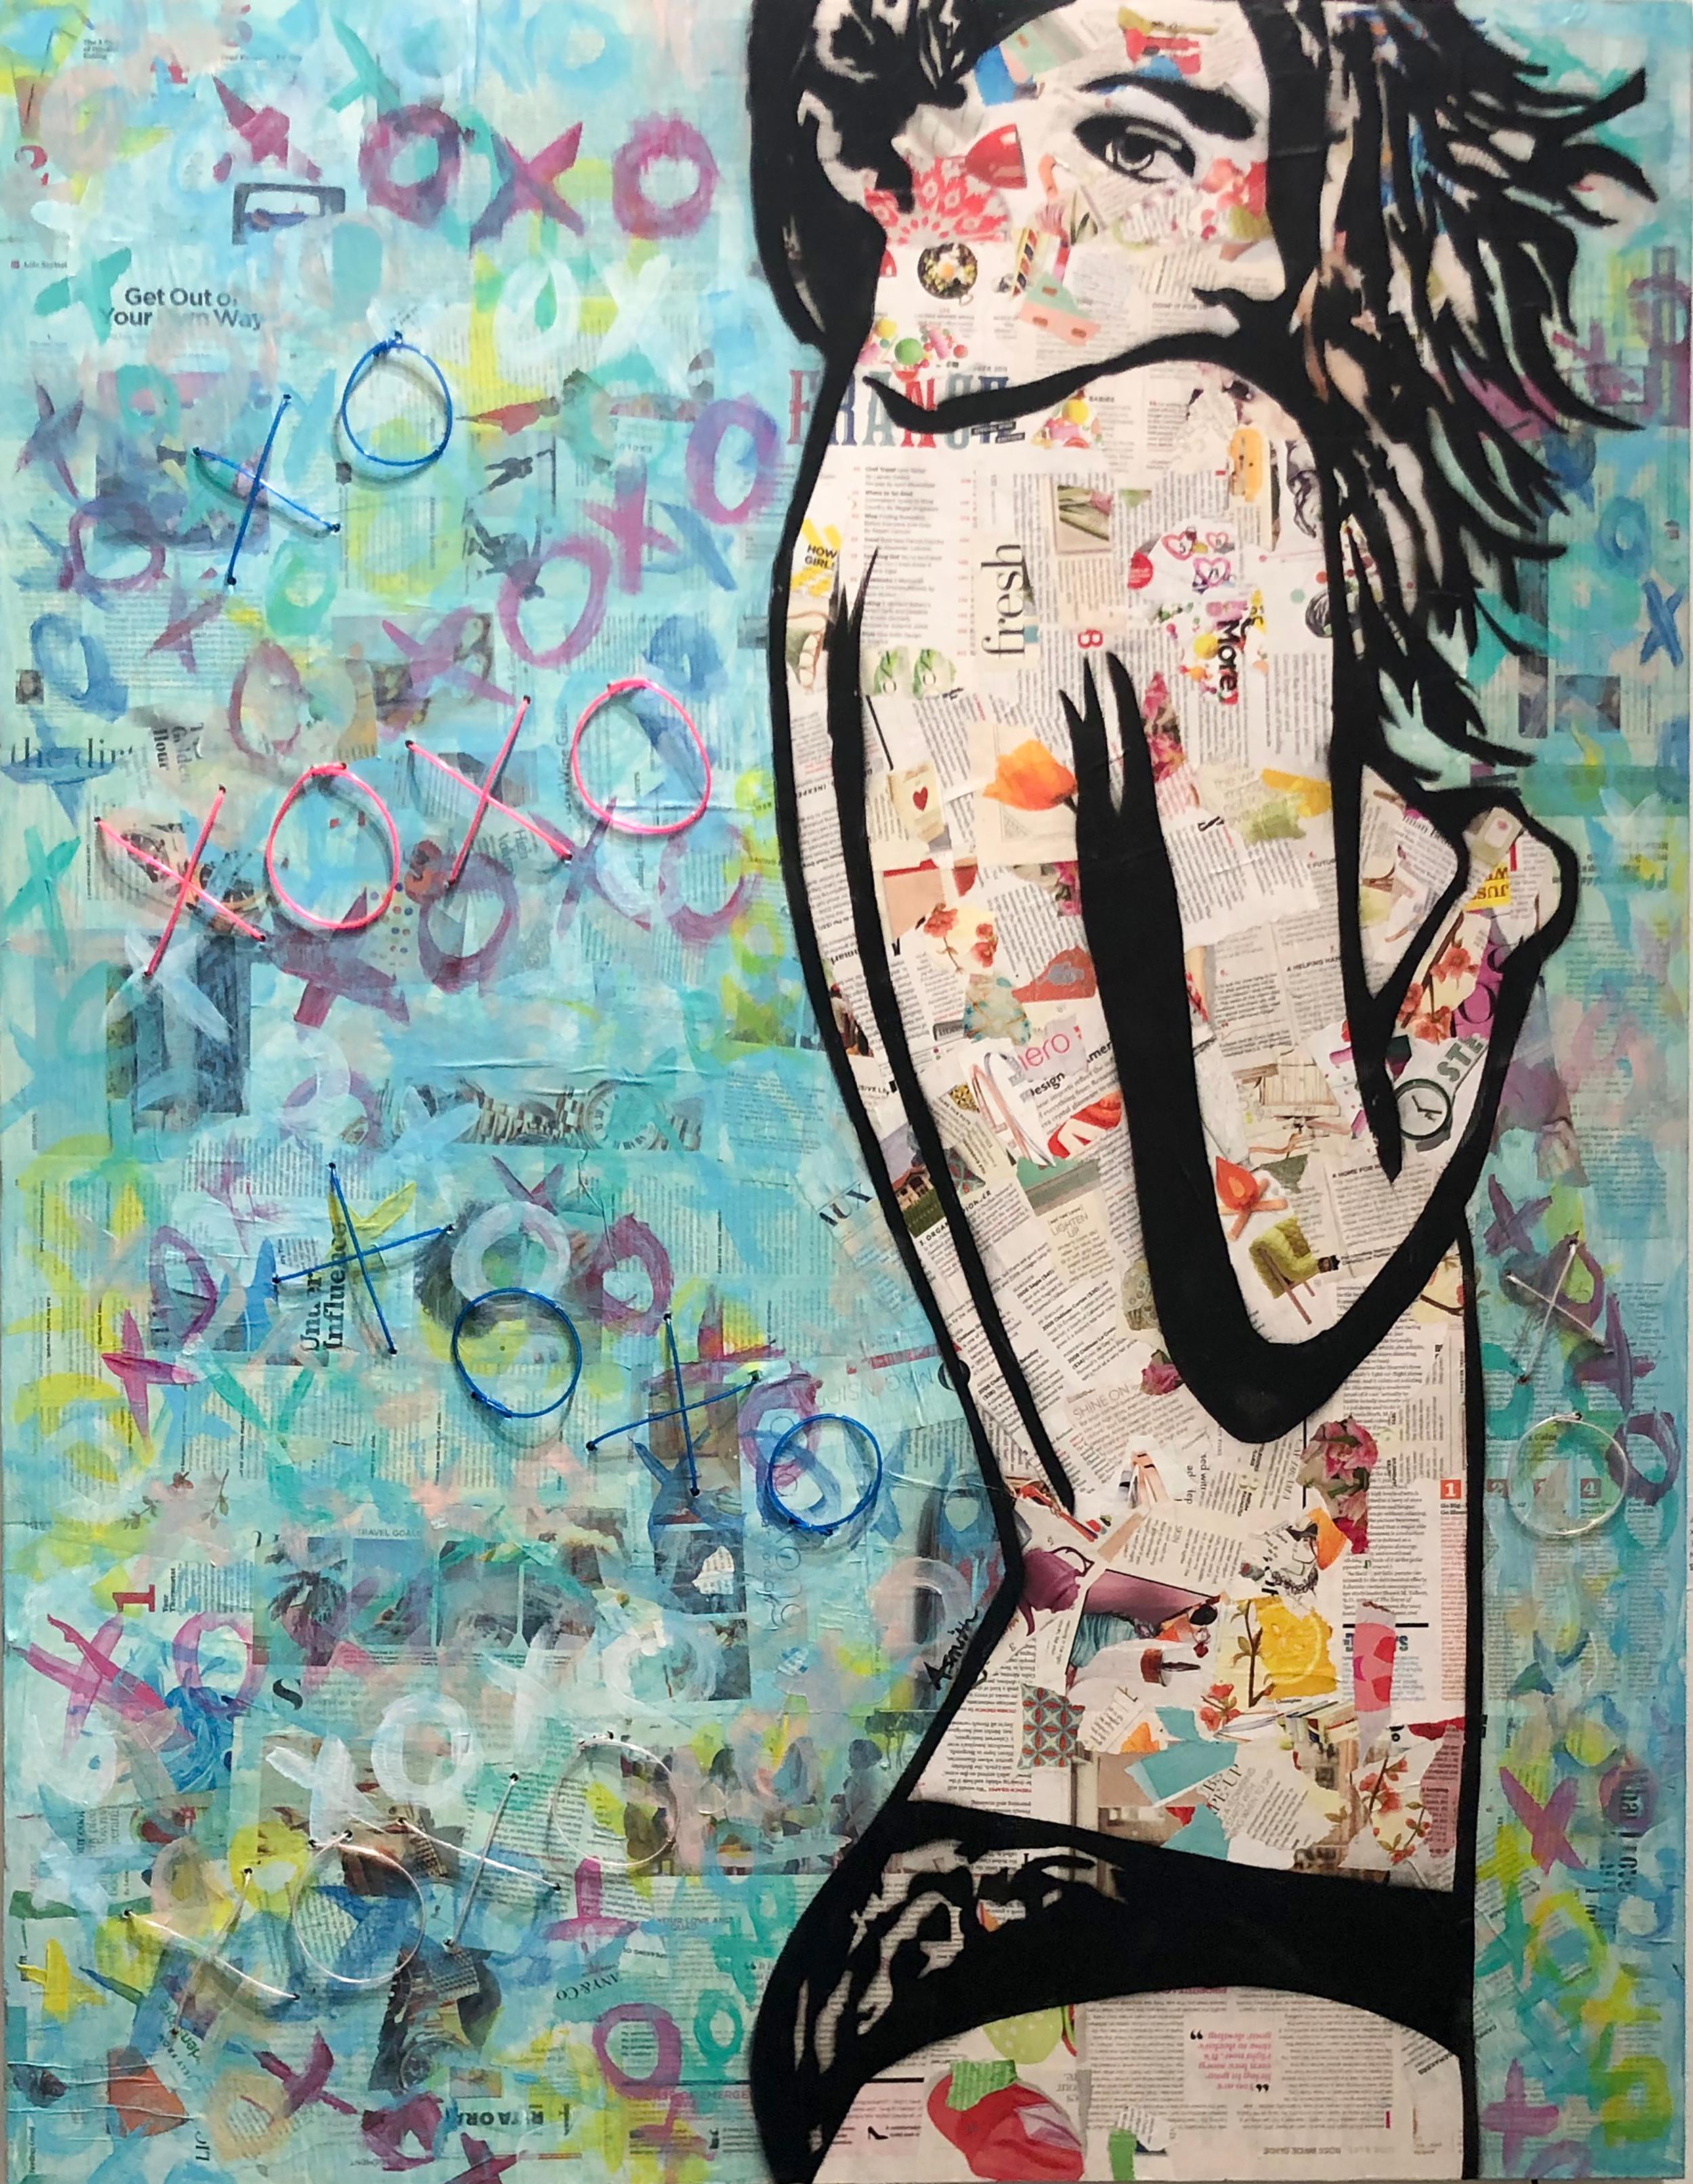 "XOXO" Collage, Stencil and Acrylic on Wood with Neon